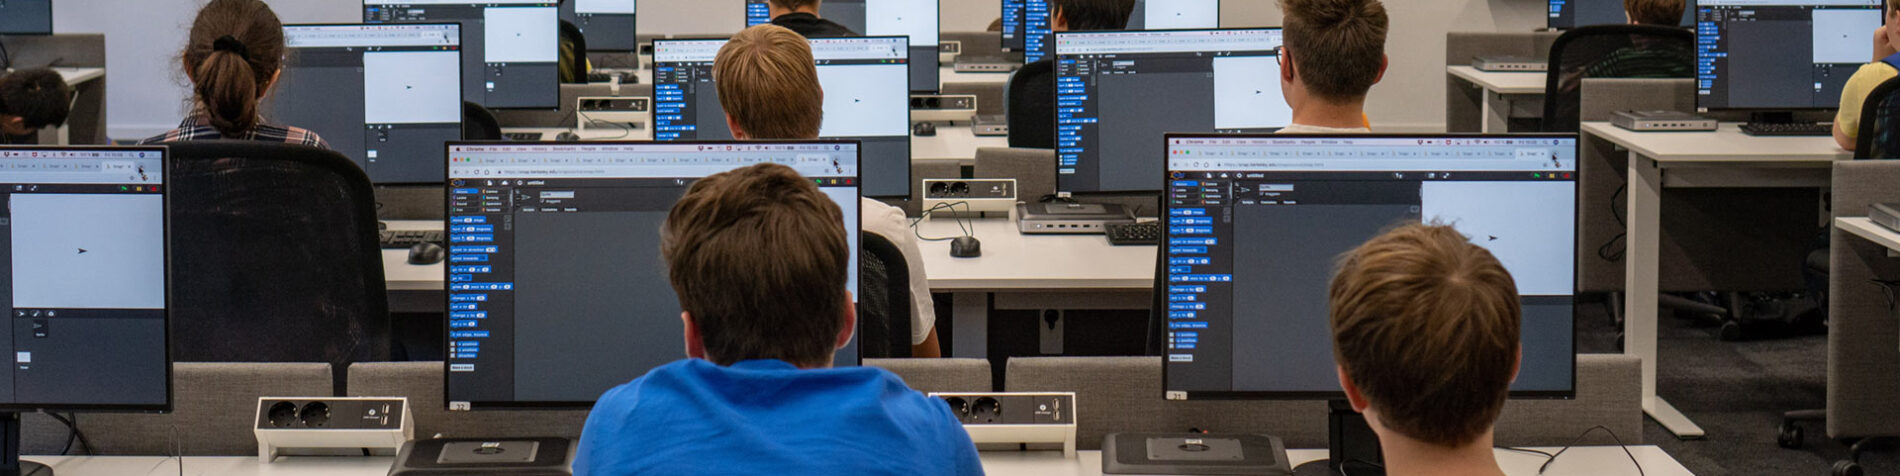 Learning for Life: Youth Coding at SAP Training Centers in Europe